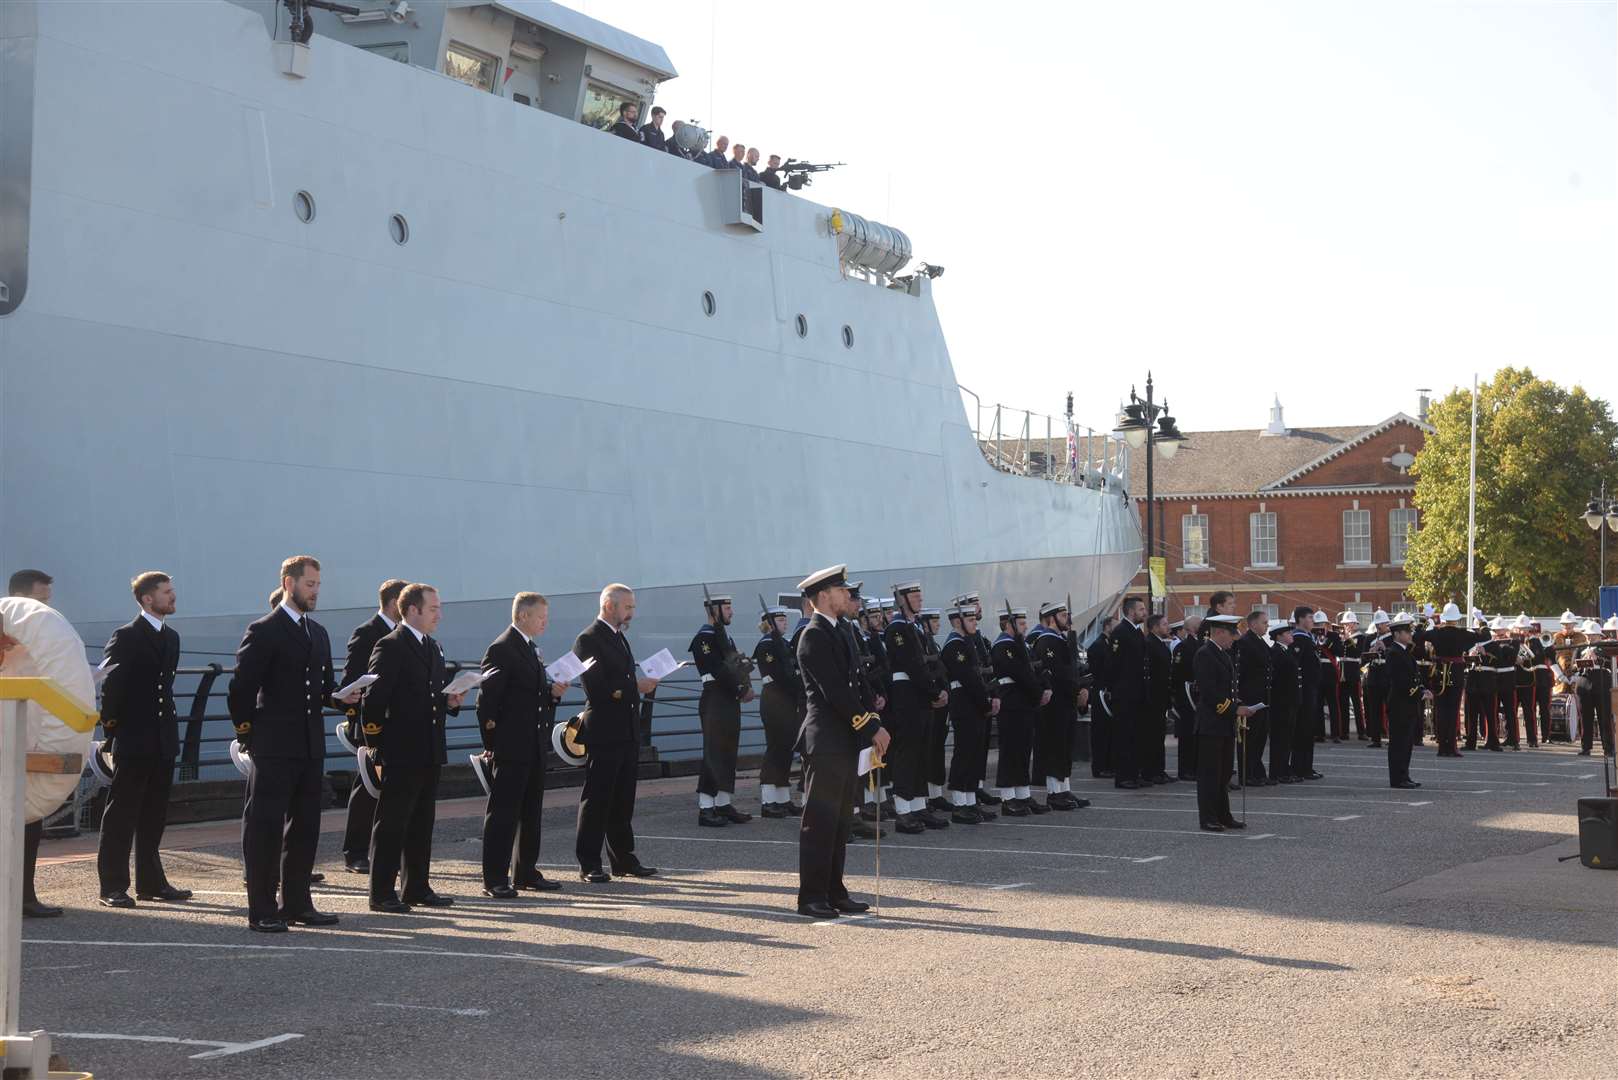 The HMS Medway commisioning ceremony at the Chatham Historic Dockyard on Thursday. Picture:Chris Davey. (16979206)